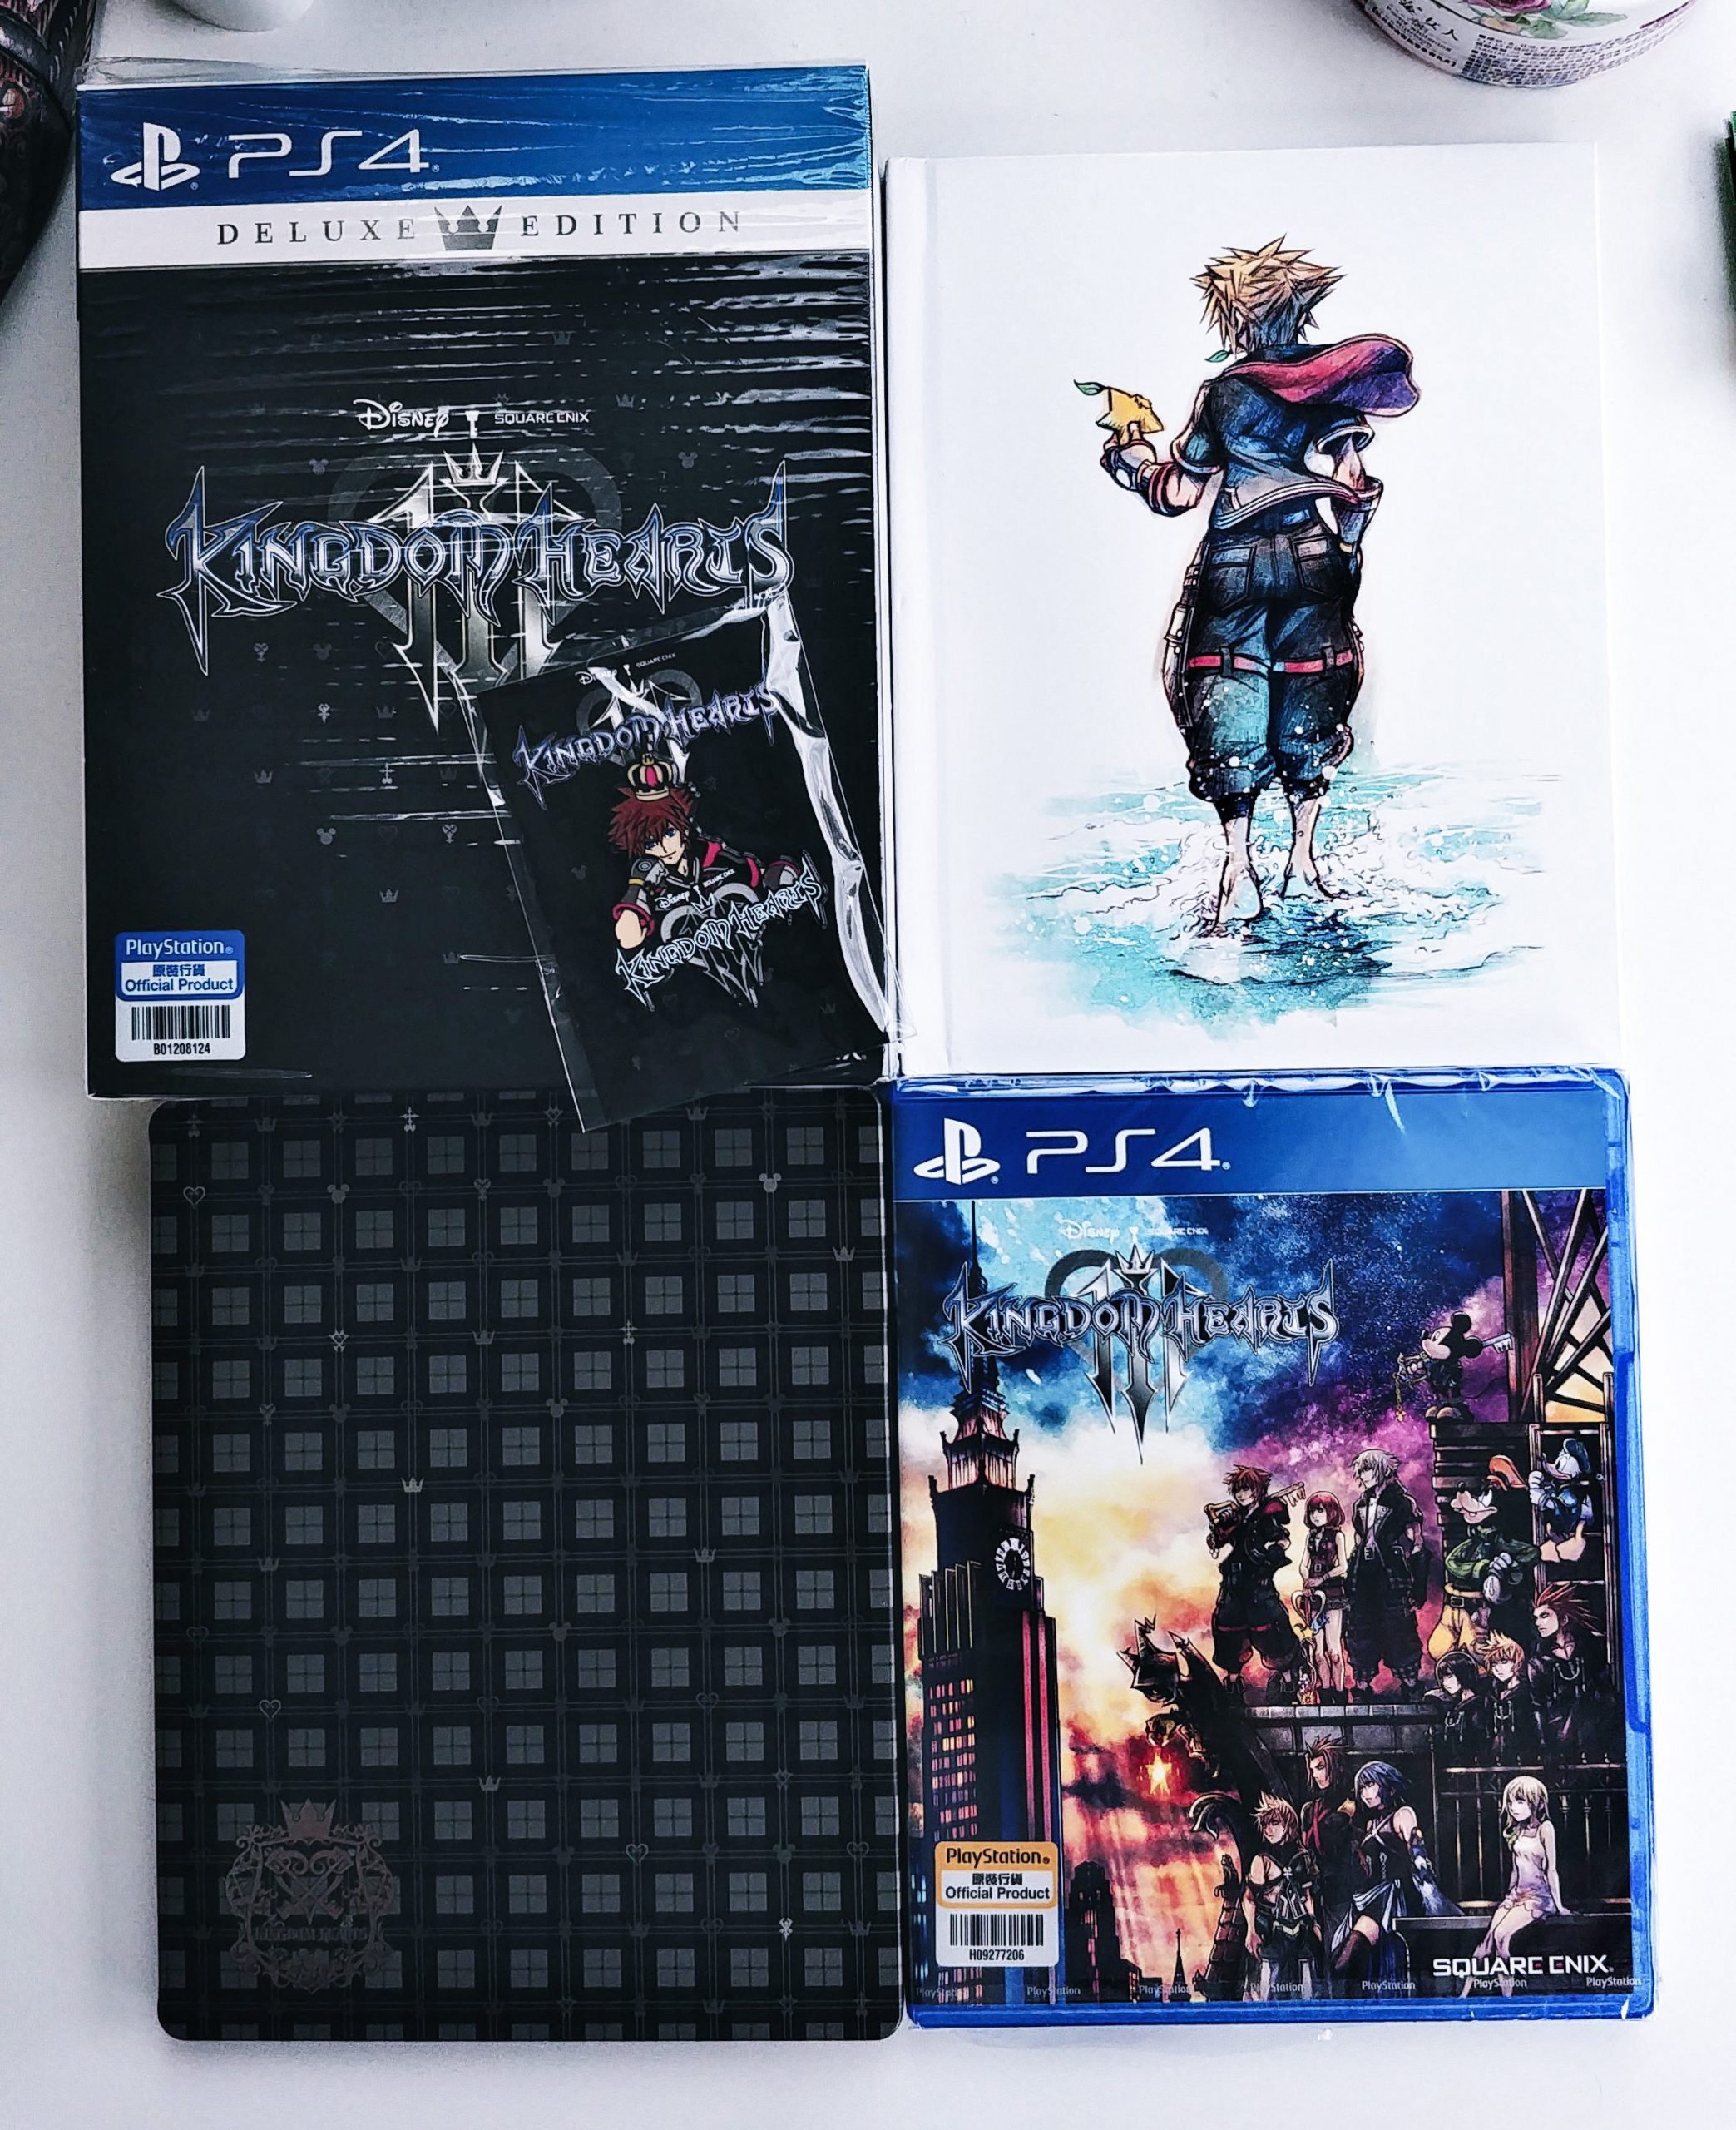  Kingdom Hearts 3 Deluxe Edition (PS4) : Video Games